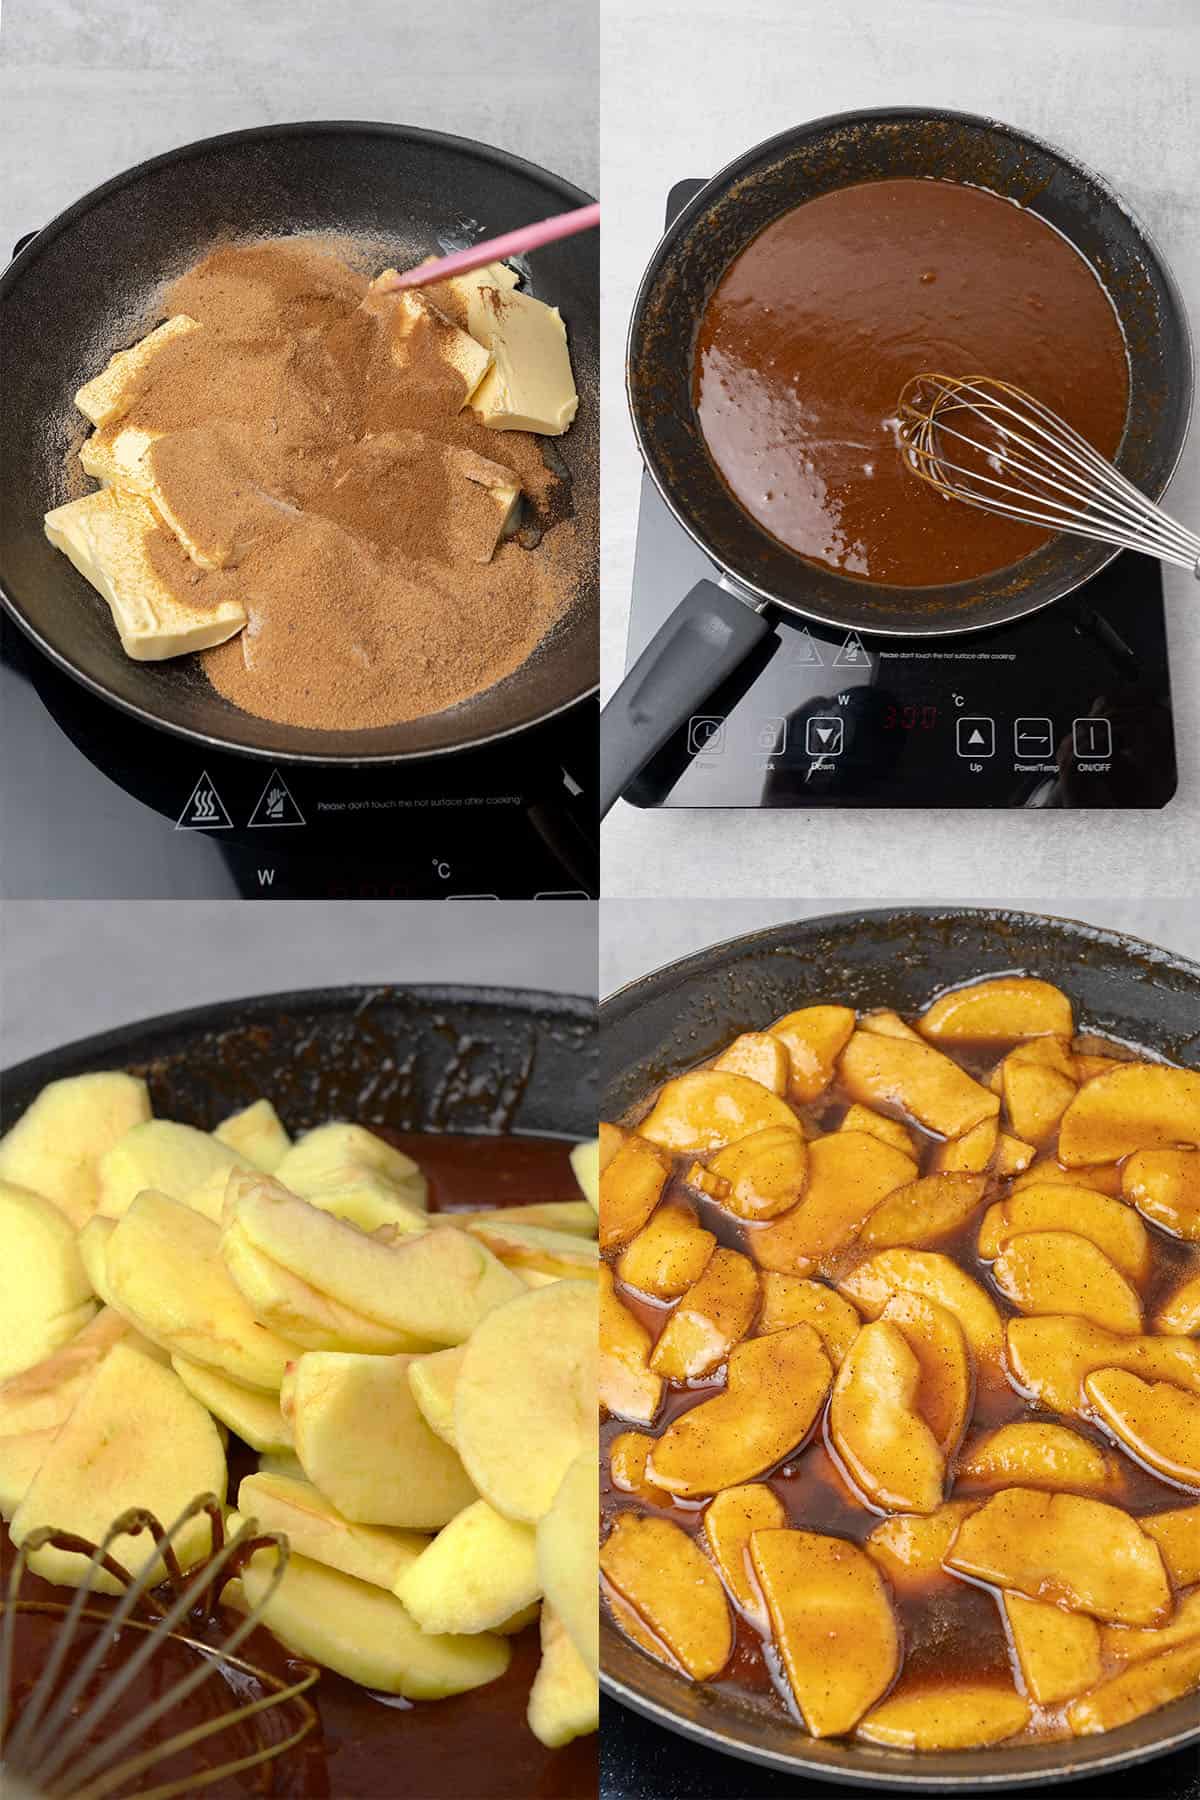 Caramelized apple topping process.